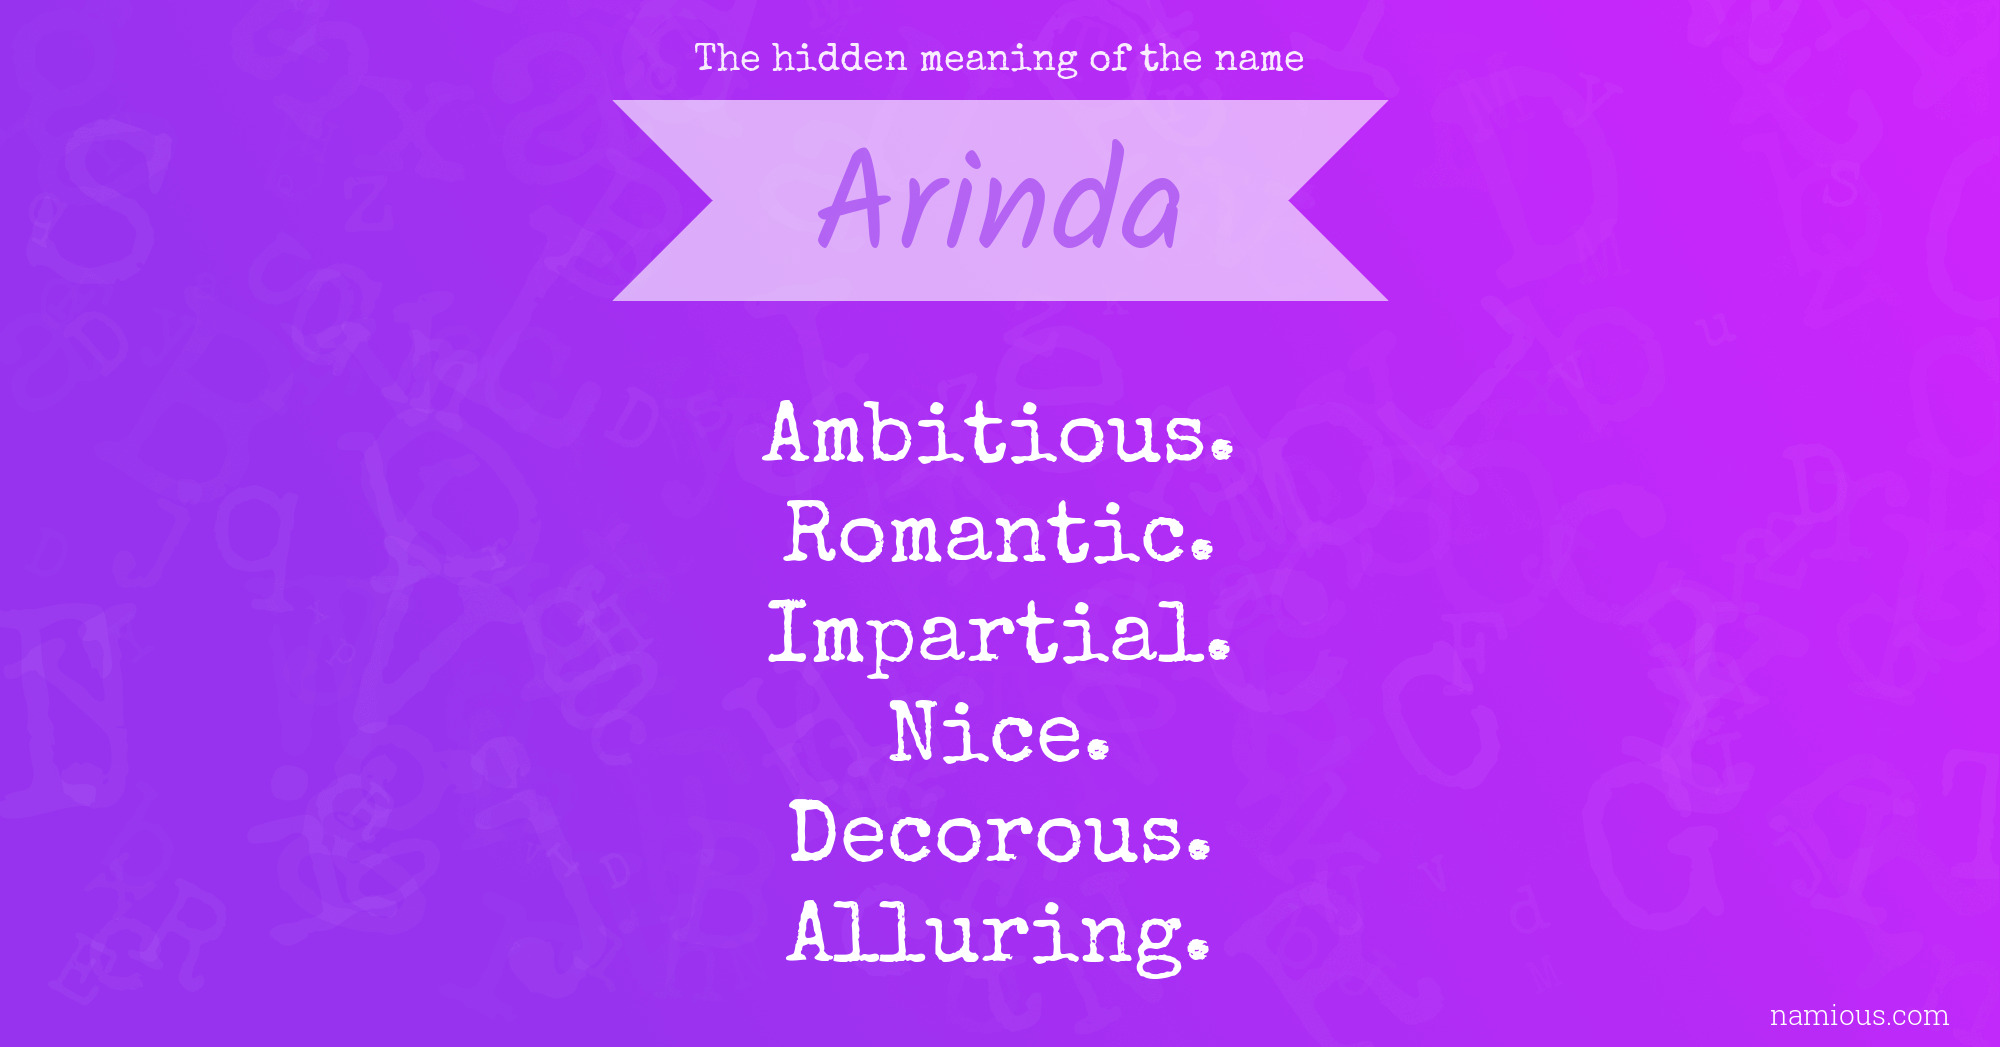 The hidden meaning of the name Arinda